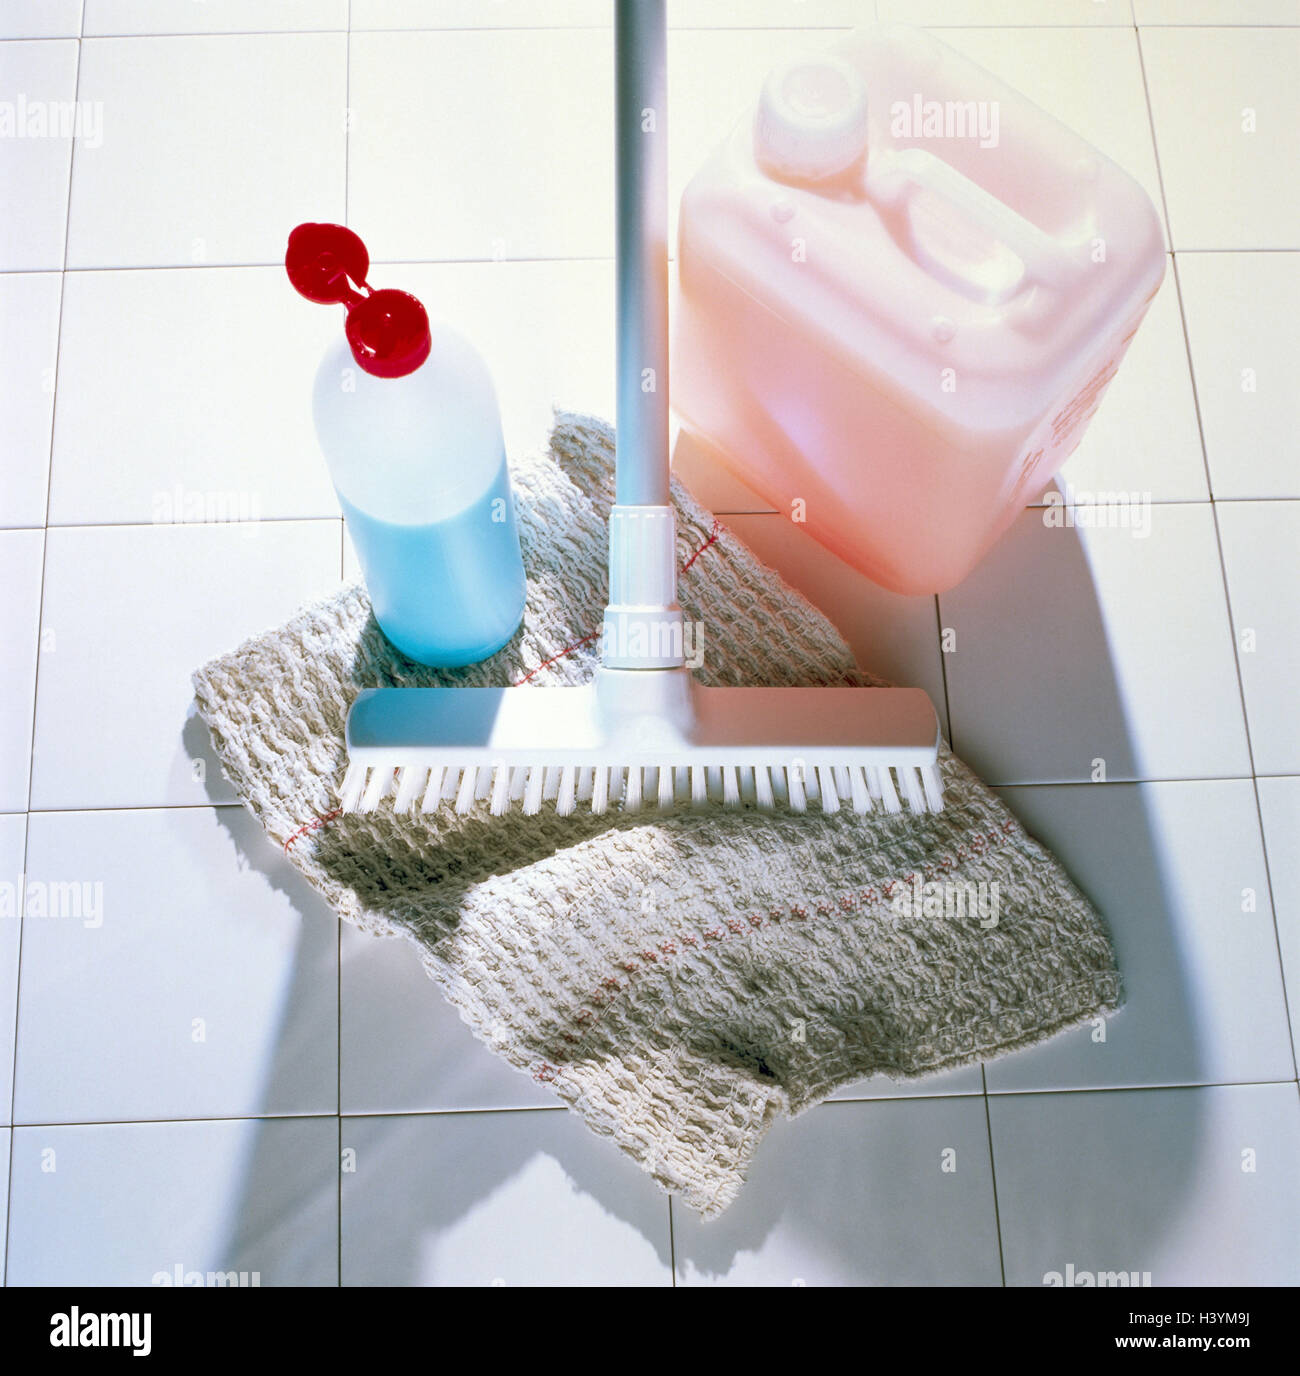 Household, cleaning, floor, cleaning agent, scrubbing brush, cleaning implements, cleaning materials, household cleaners, cleaning, cleanness, cleanly, purely, household, budgetary funds, cleanliness, housework, tiled floor, cleaning cloth, cloth, product Stock Photo